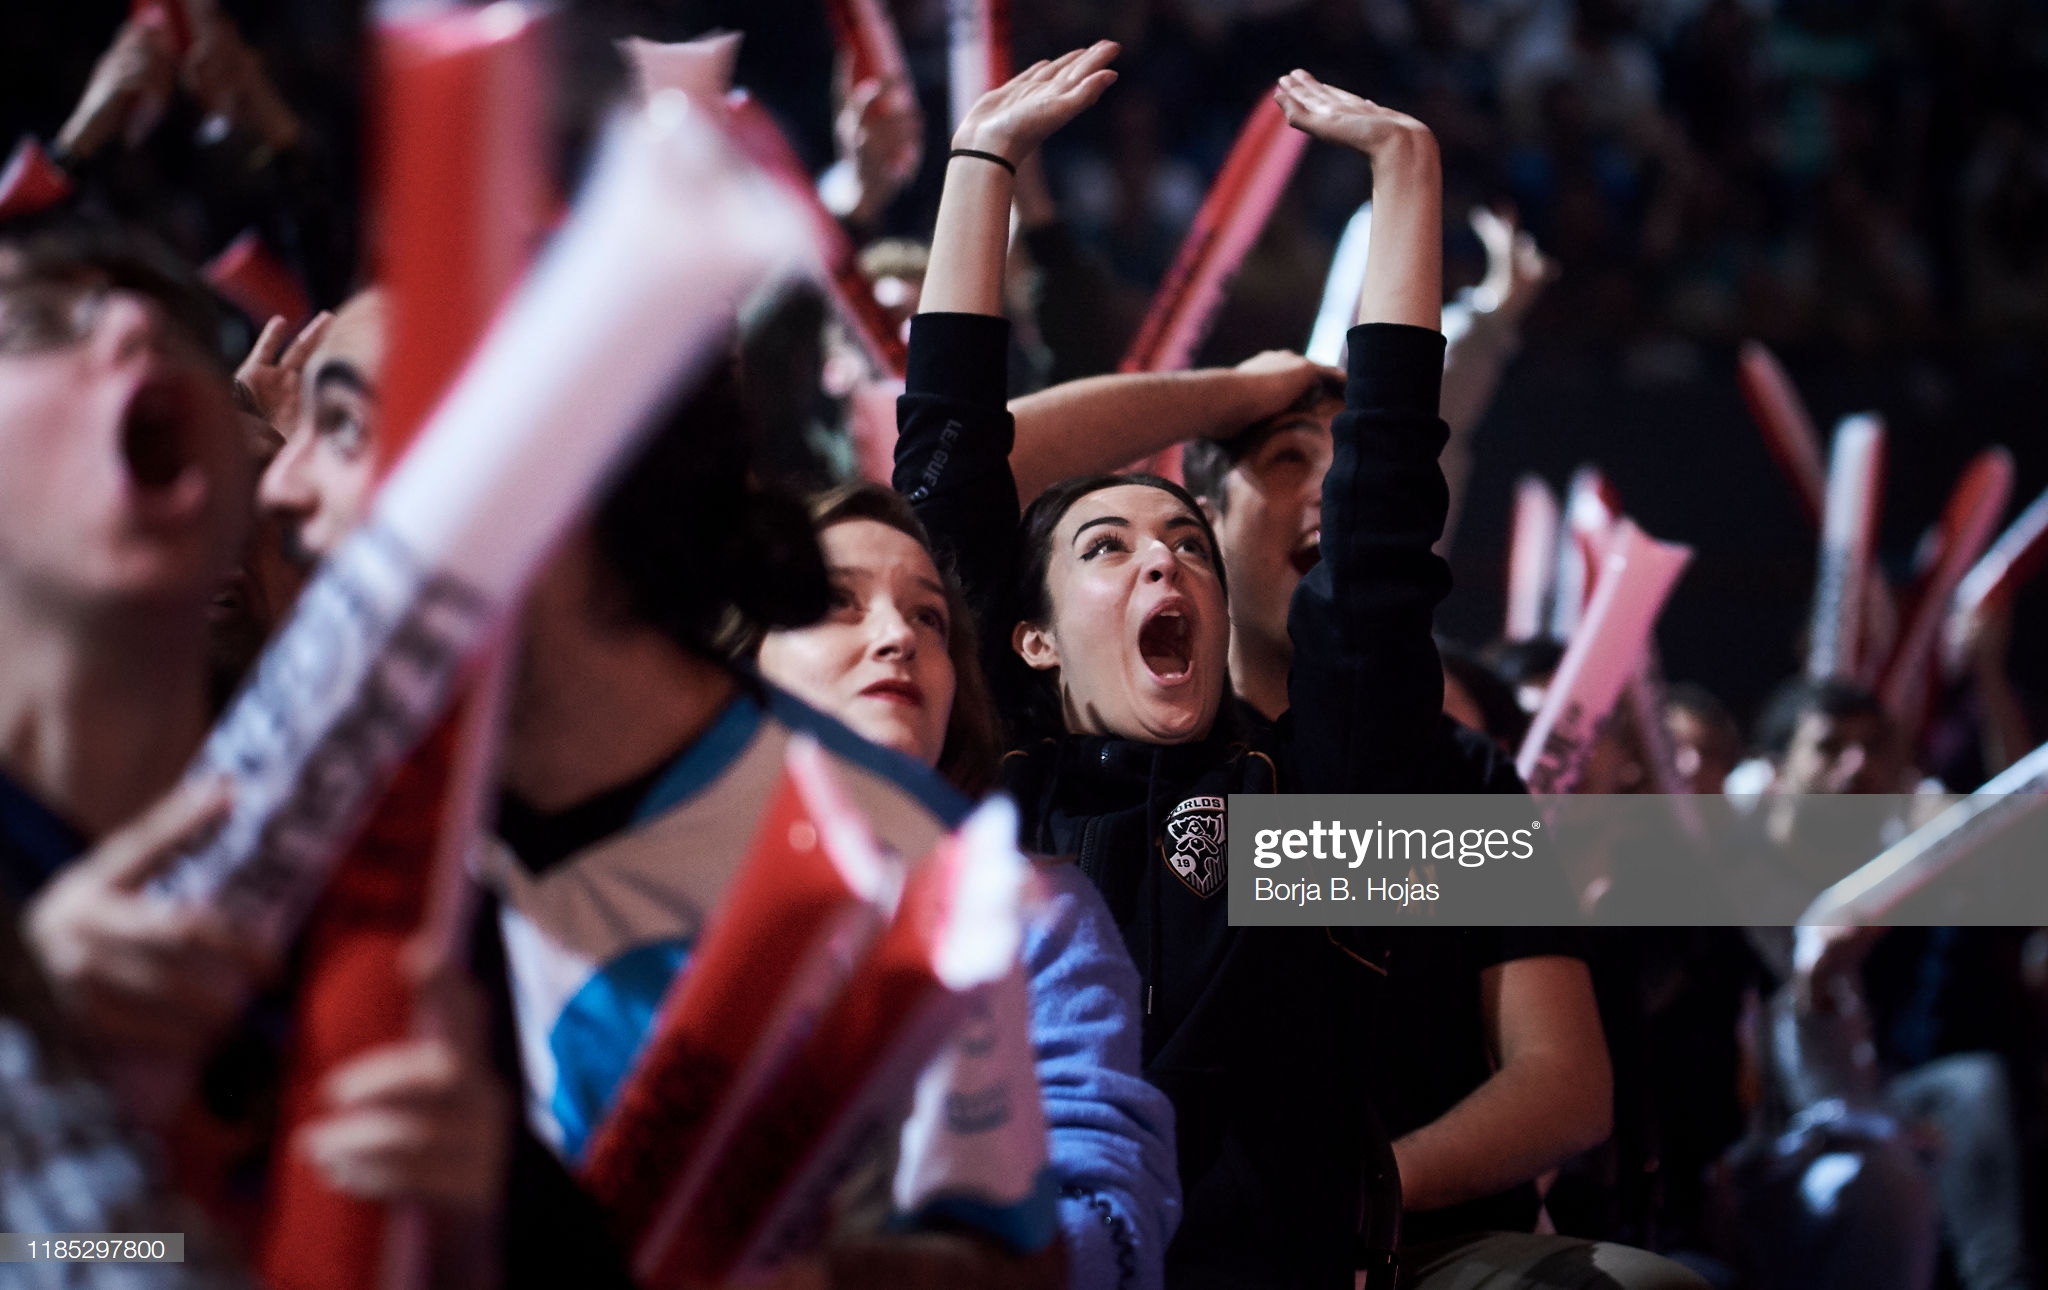 gettyimages-1185297800-2048x2048.jpg